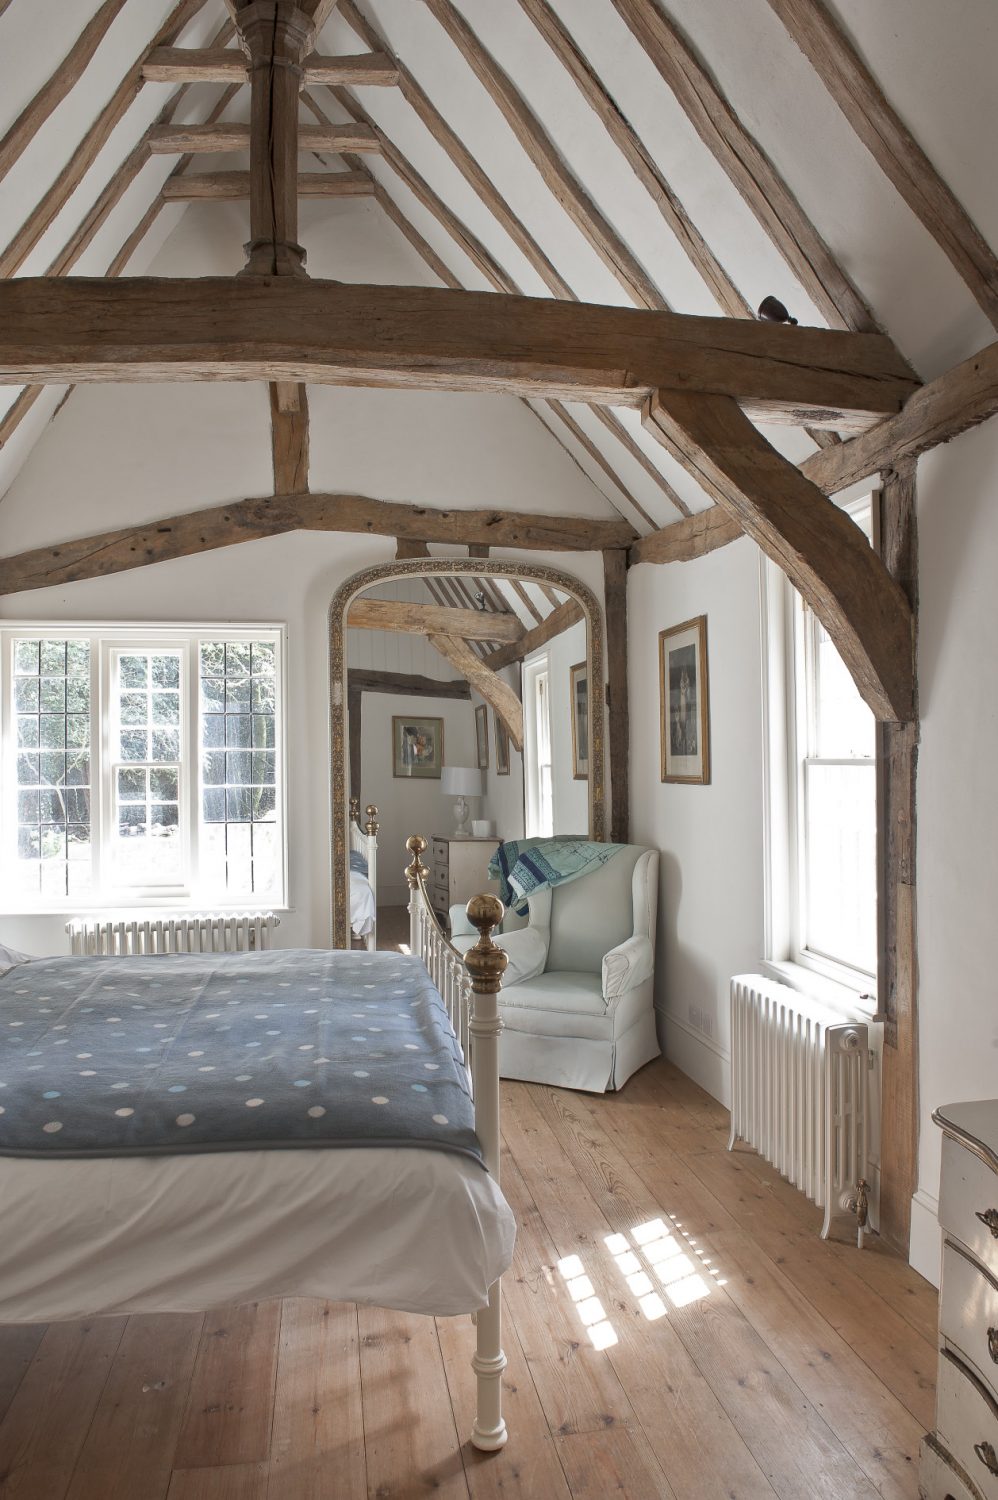 The room beyond is the bedroom where the warm, honey coloured timbers are offset by fresh blue and white linens on the bed and armchair